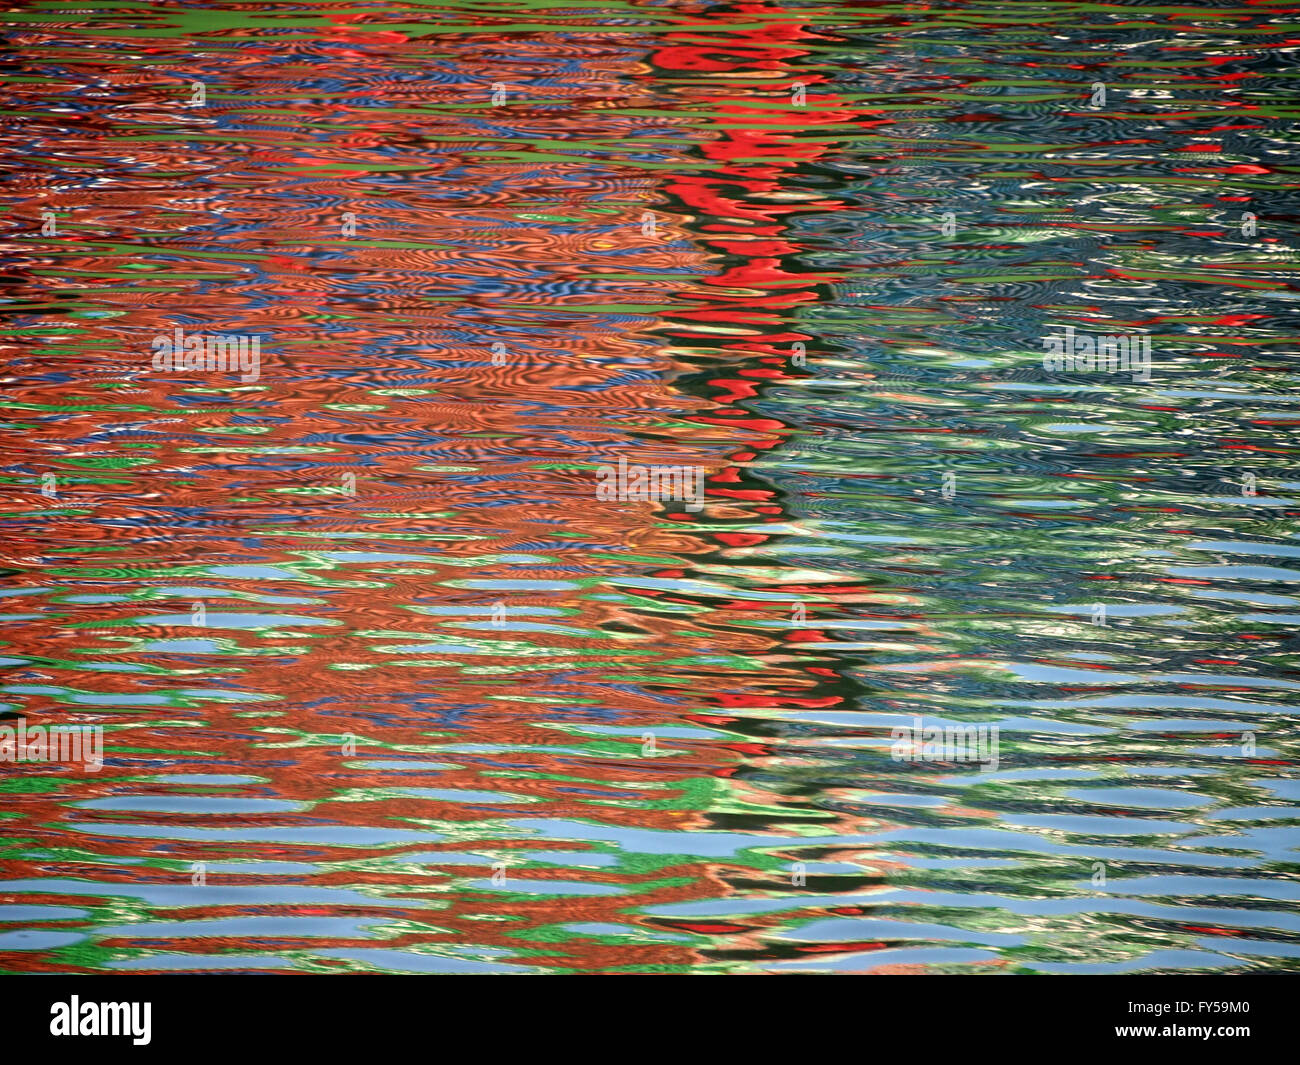 Red Blue Color pattern shimmers and reflects in ripples of water making a psychedelic pattern. Stock Photo